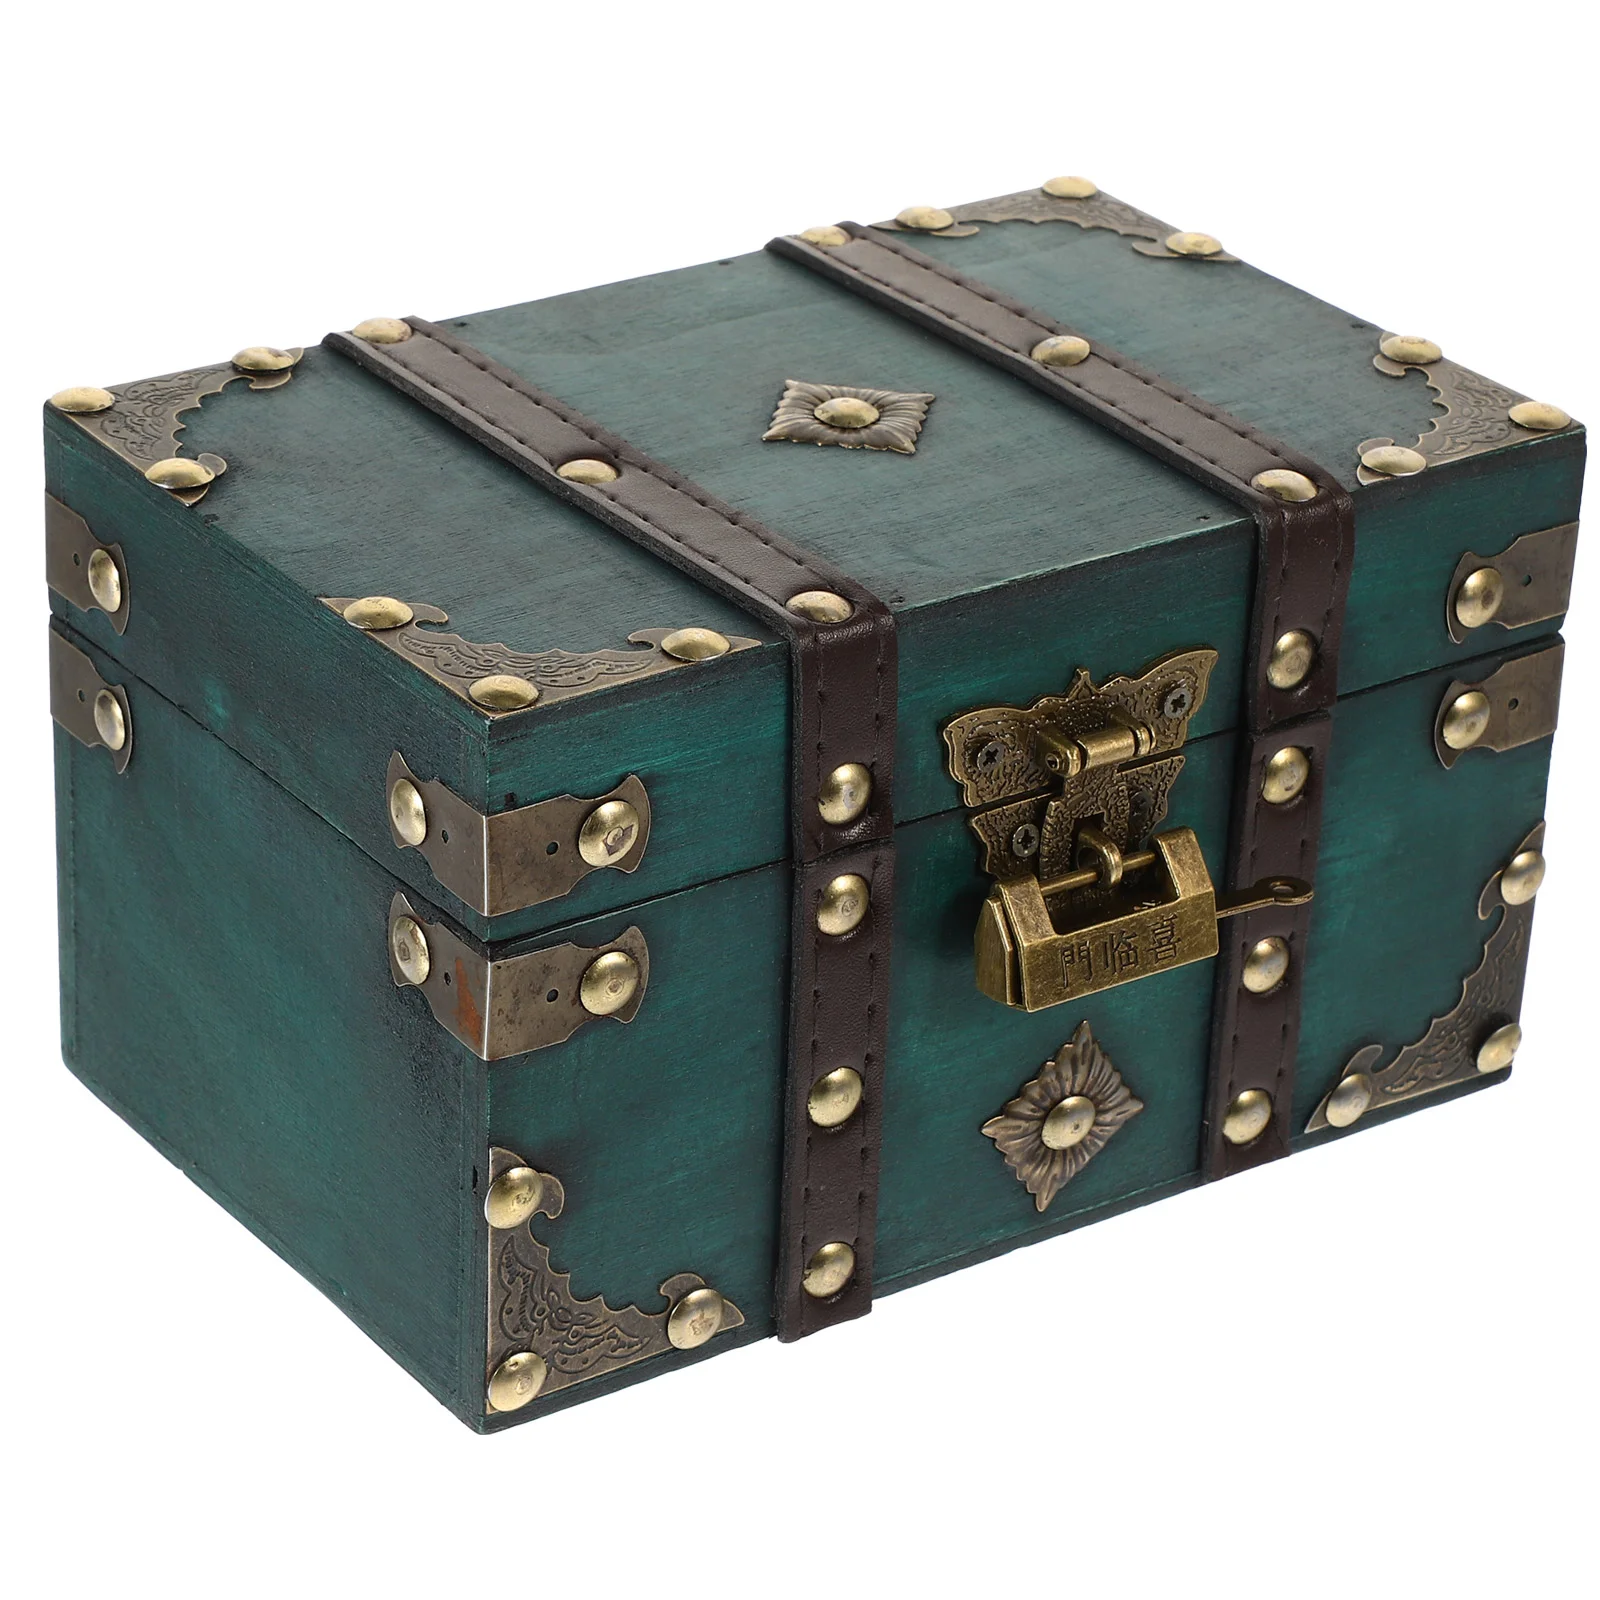 

Wooden Treasure Chest Decorative Storage Wooden Chest Box Lock And Lids Vintage Style Trunks Jewelry Keepsakes Coin Collection